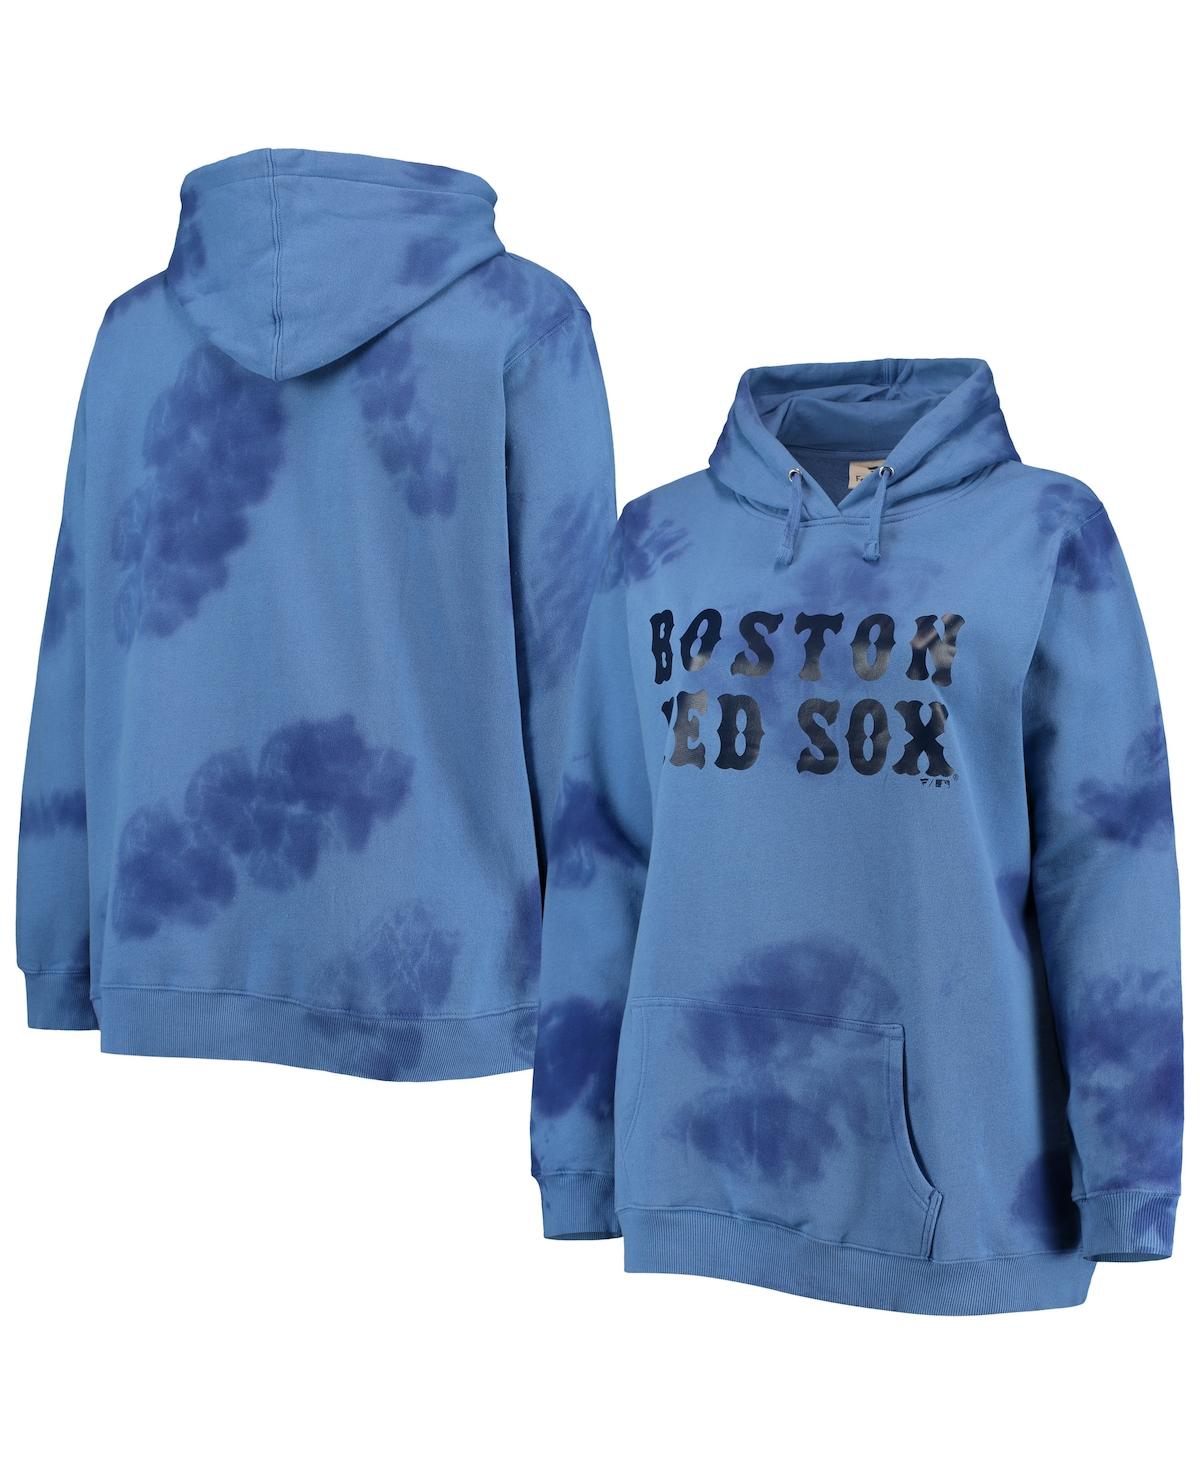 PROFILE WOMEN'S NAVY BOSTON RED SOX PLUS SIZE CLOUD PULLOVER HOODIE